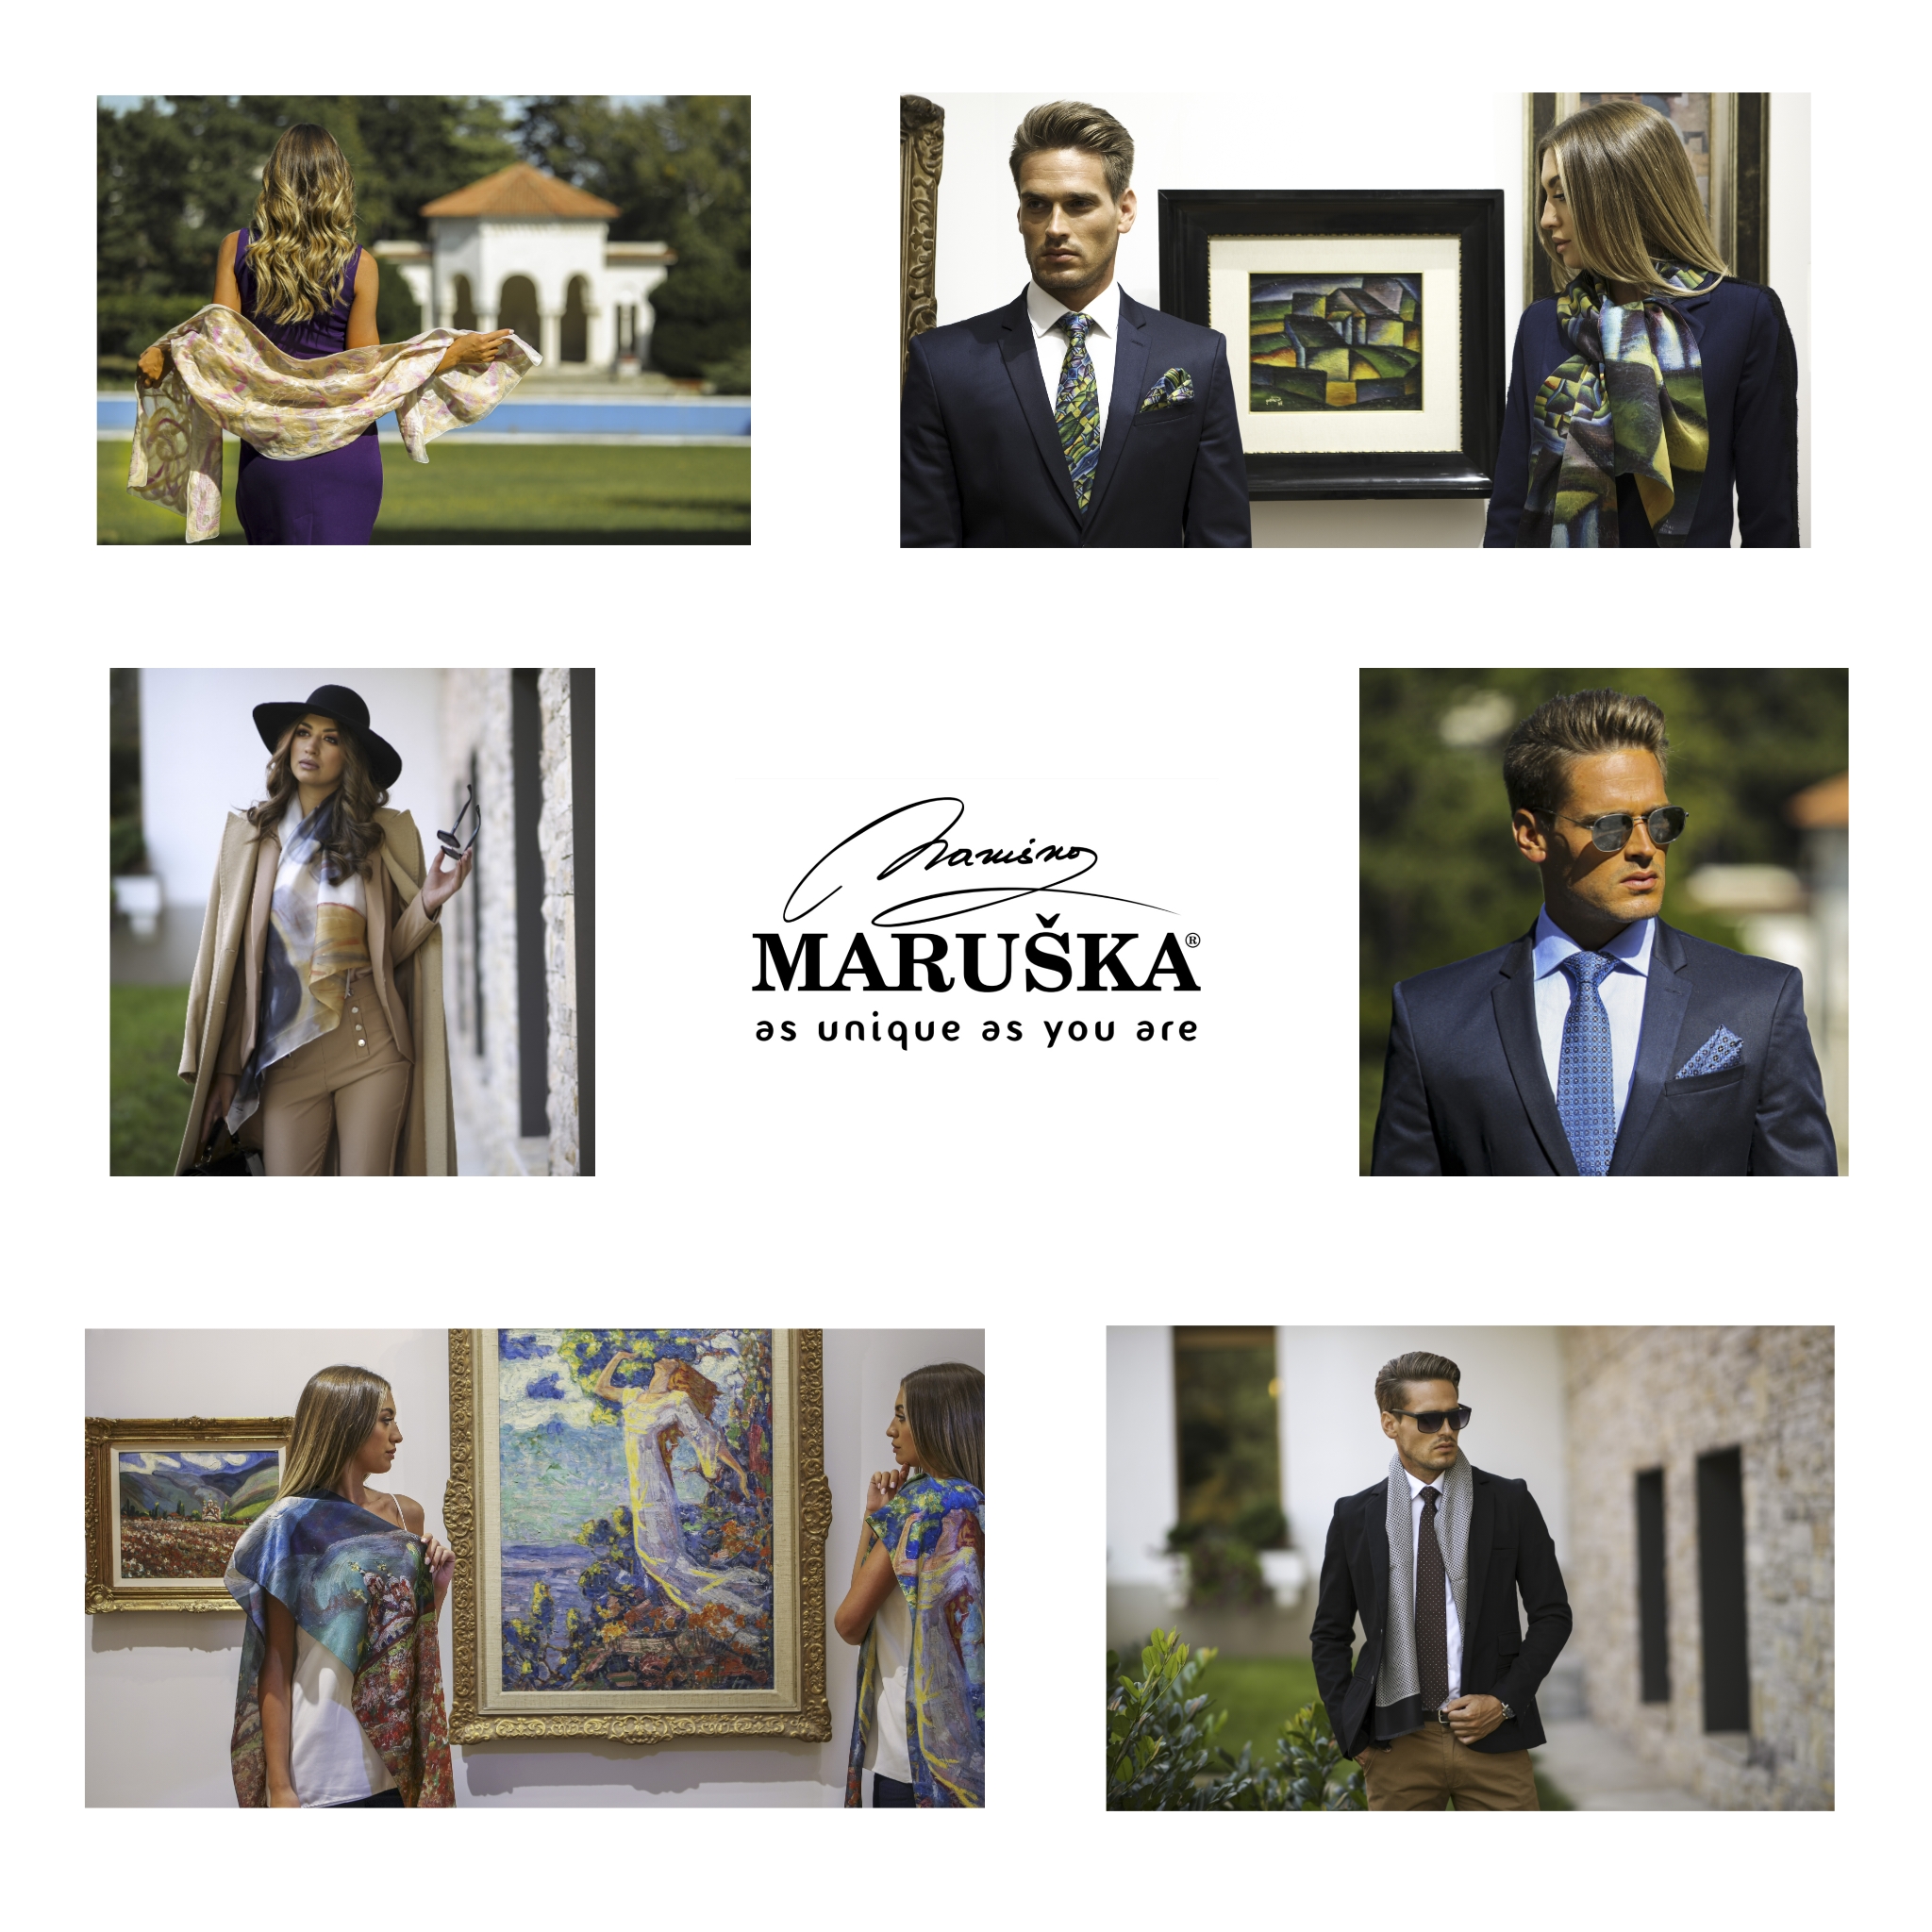 Welcome our newest member Brand Maruska